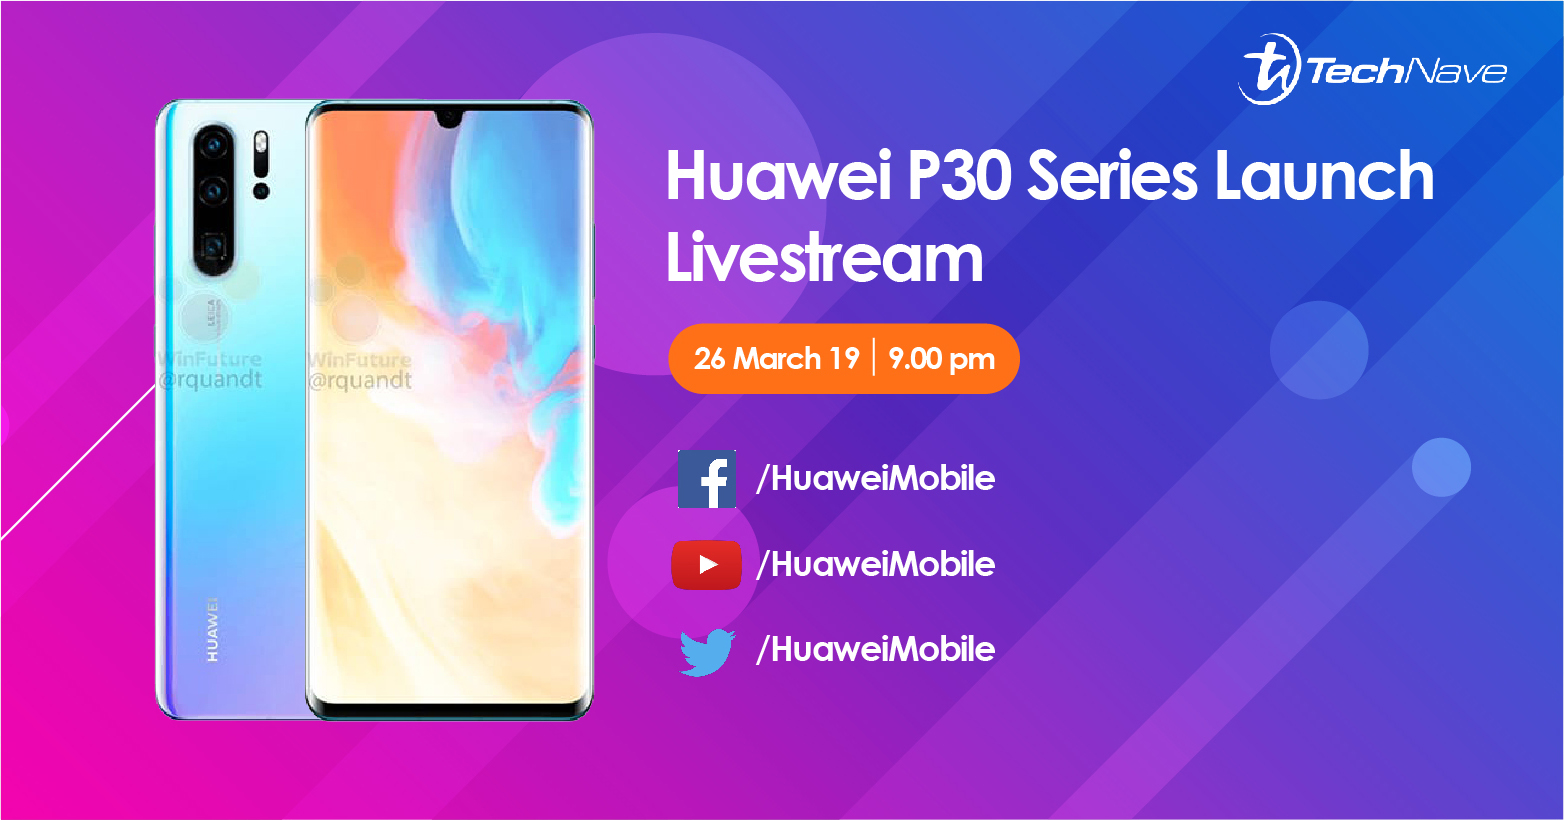 How to watch the Huawei P30 series launch livestream online